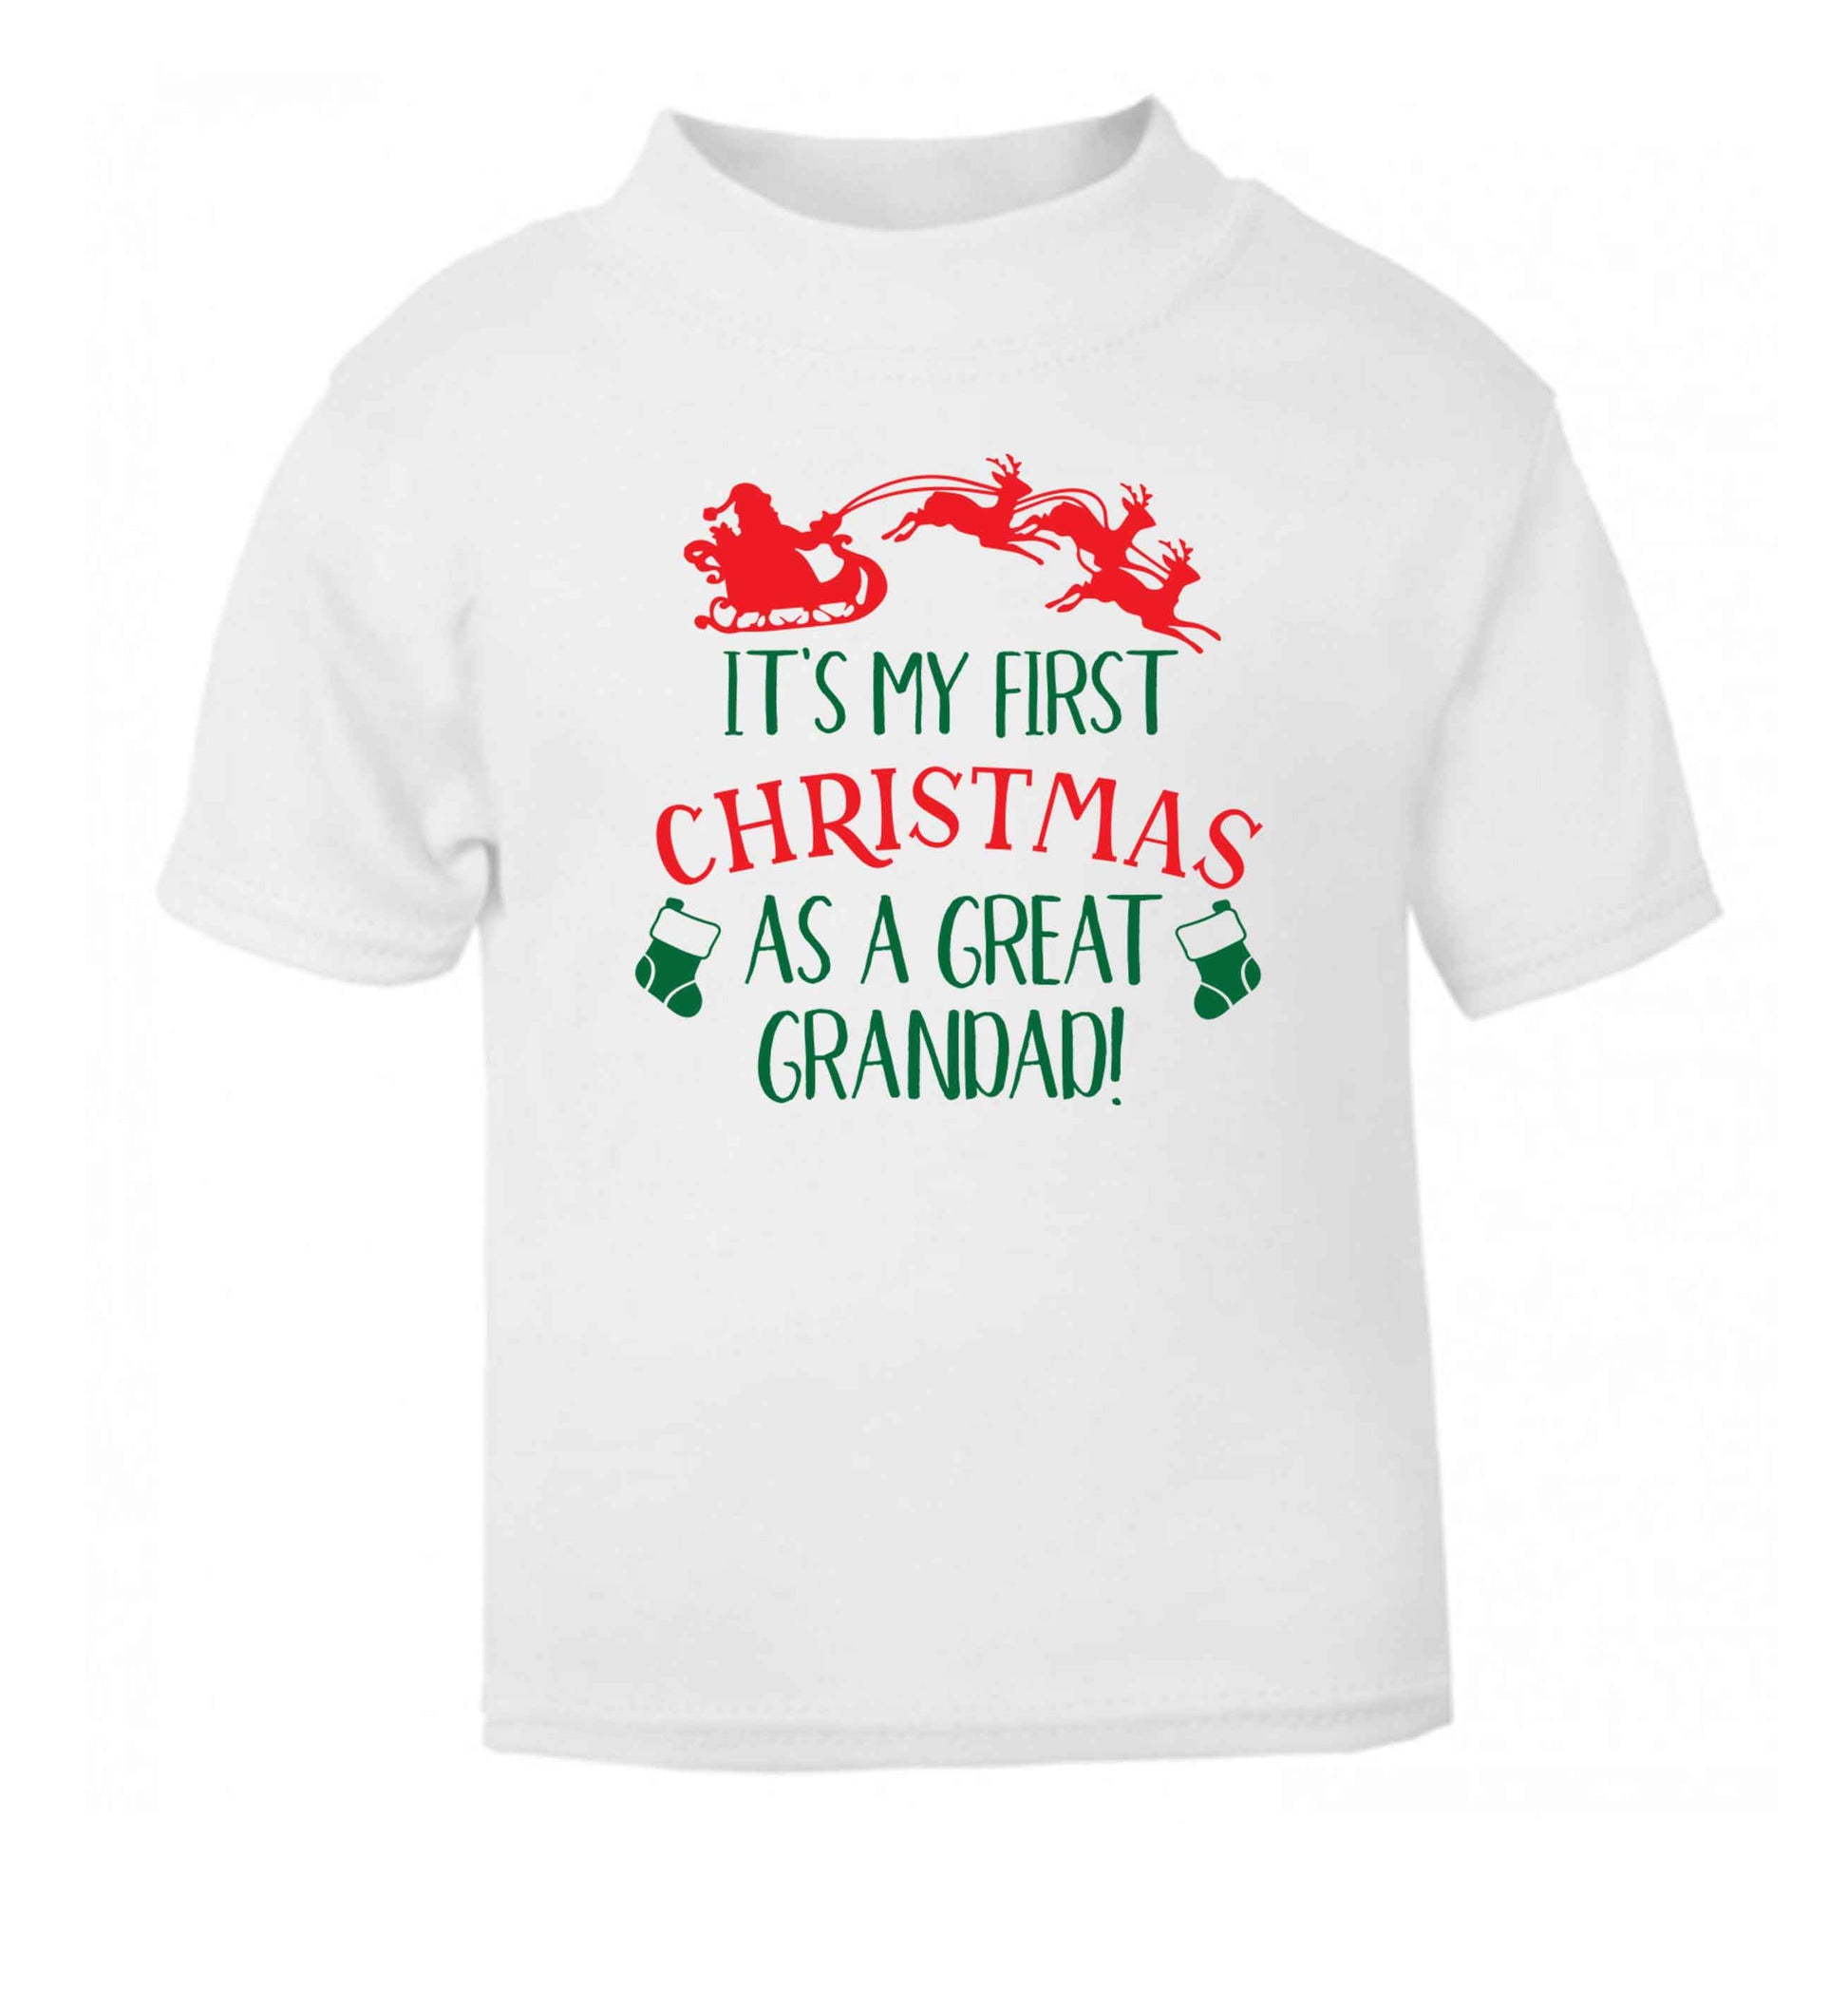 It's my first Christmas as a great grandad! white Baby Toddler Tshirt 2 Years